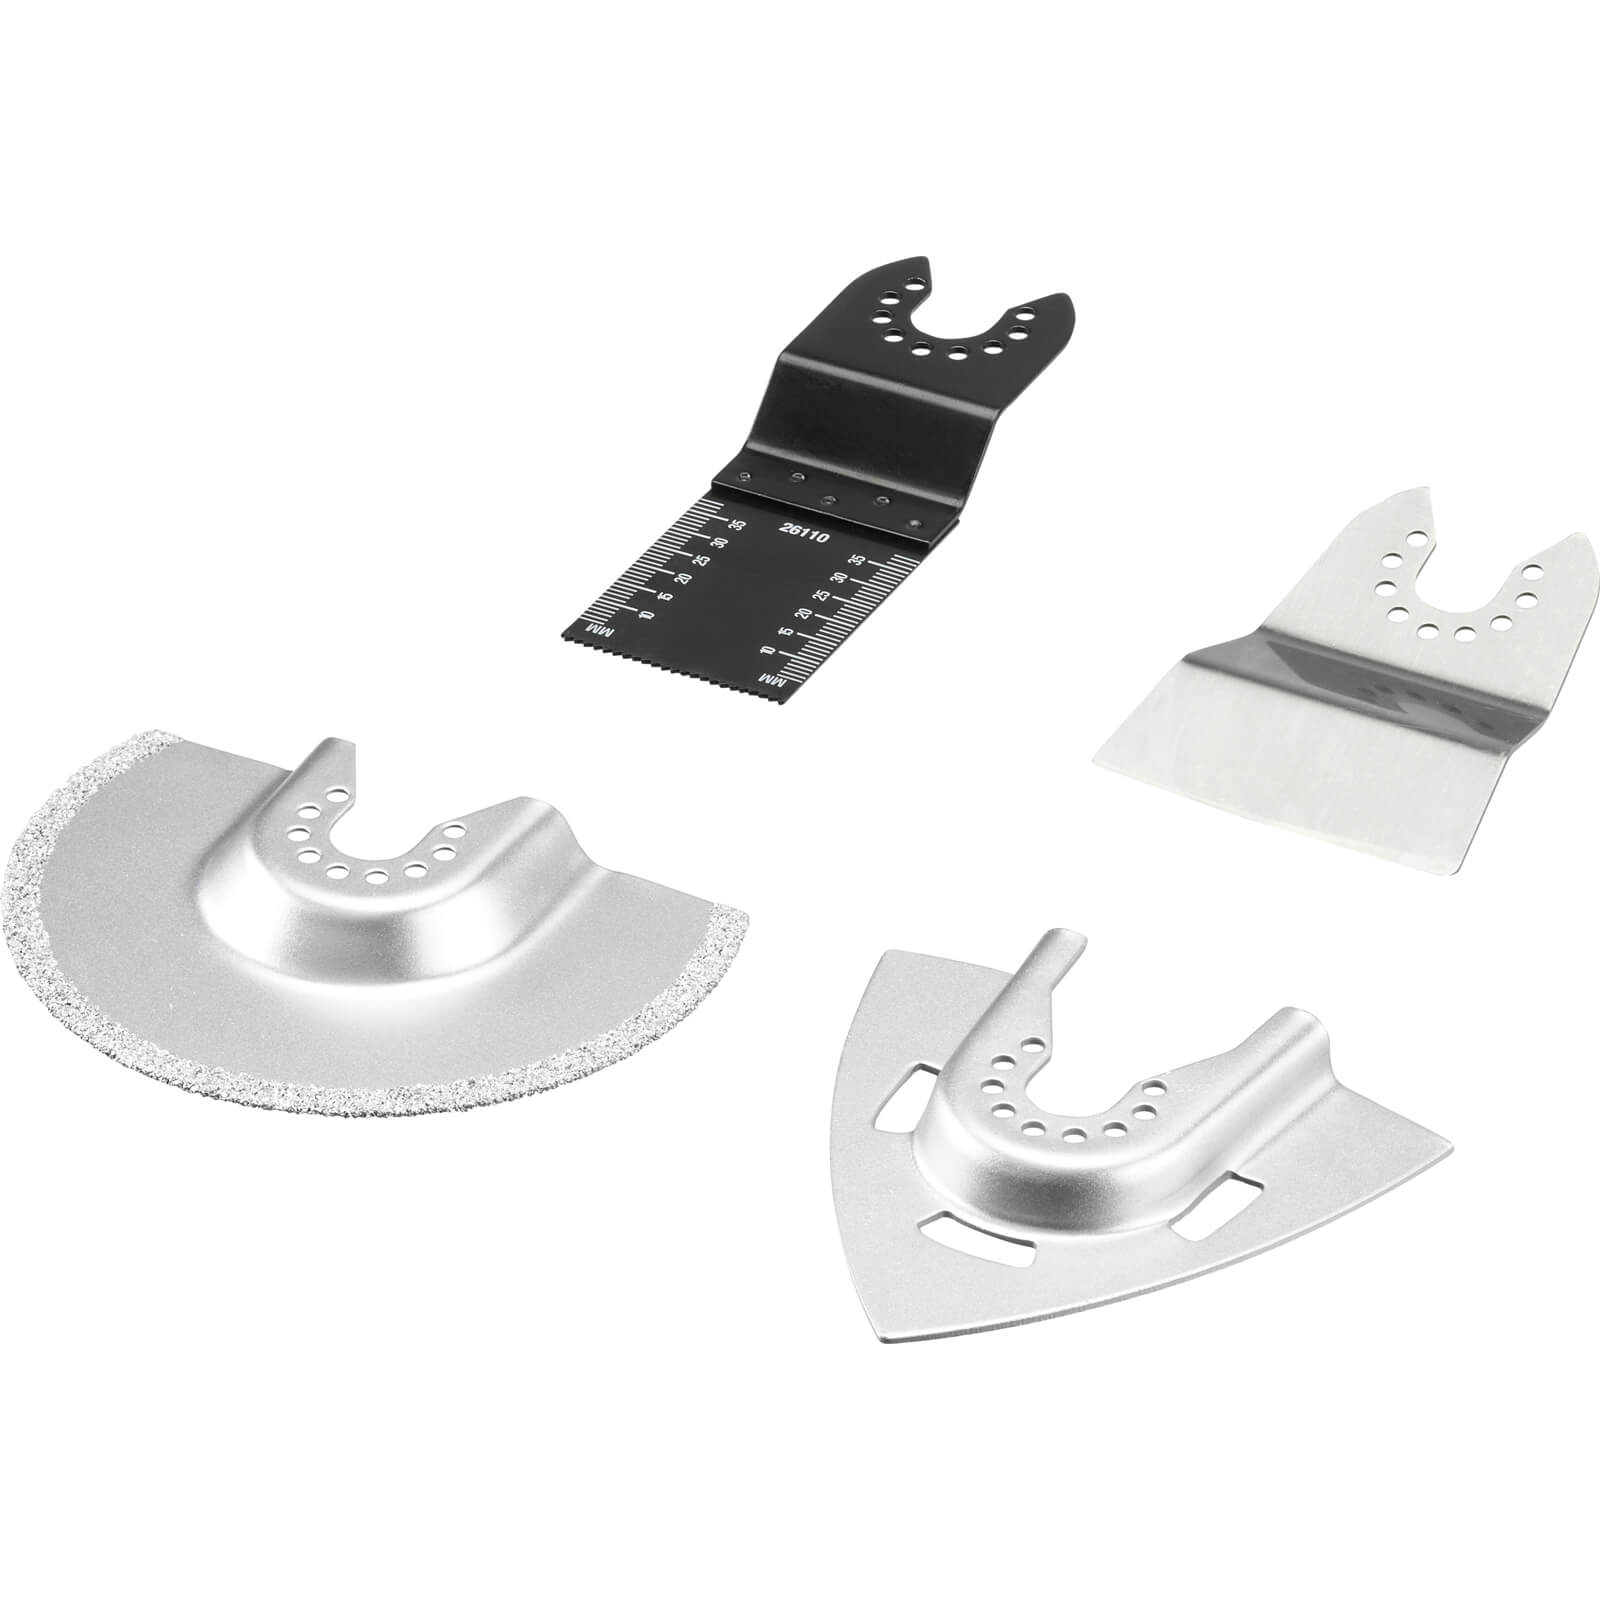 Stanley FatMax 4 Piece Tiling Set for Oscillating Multi Tools